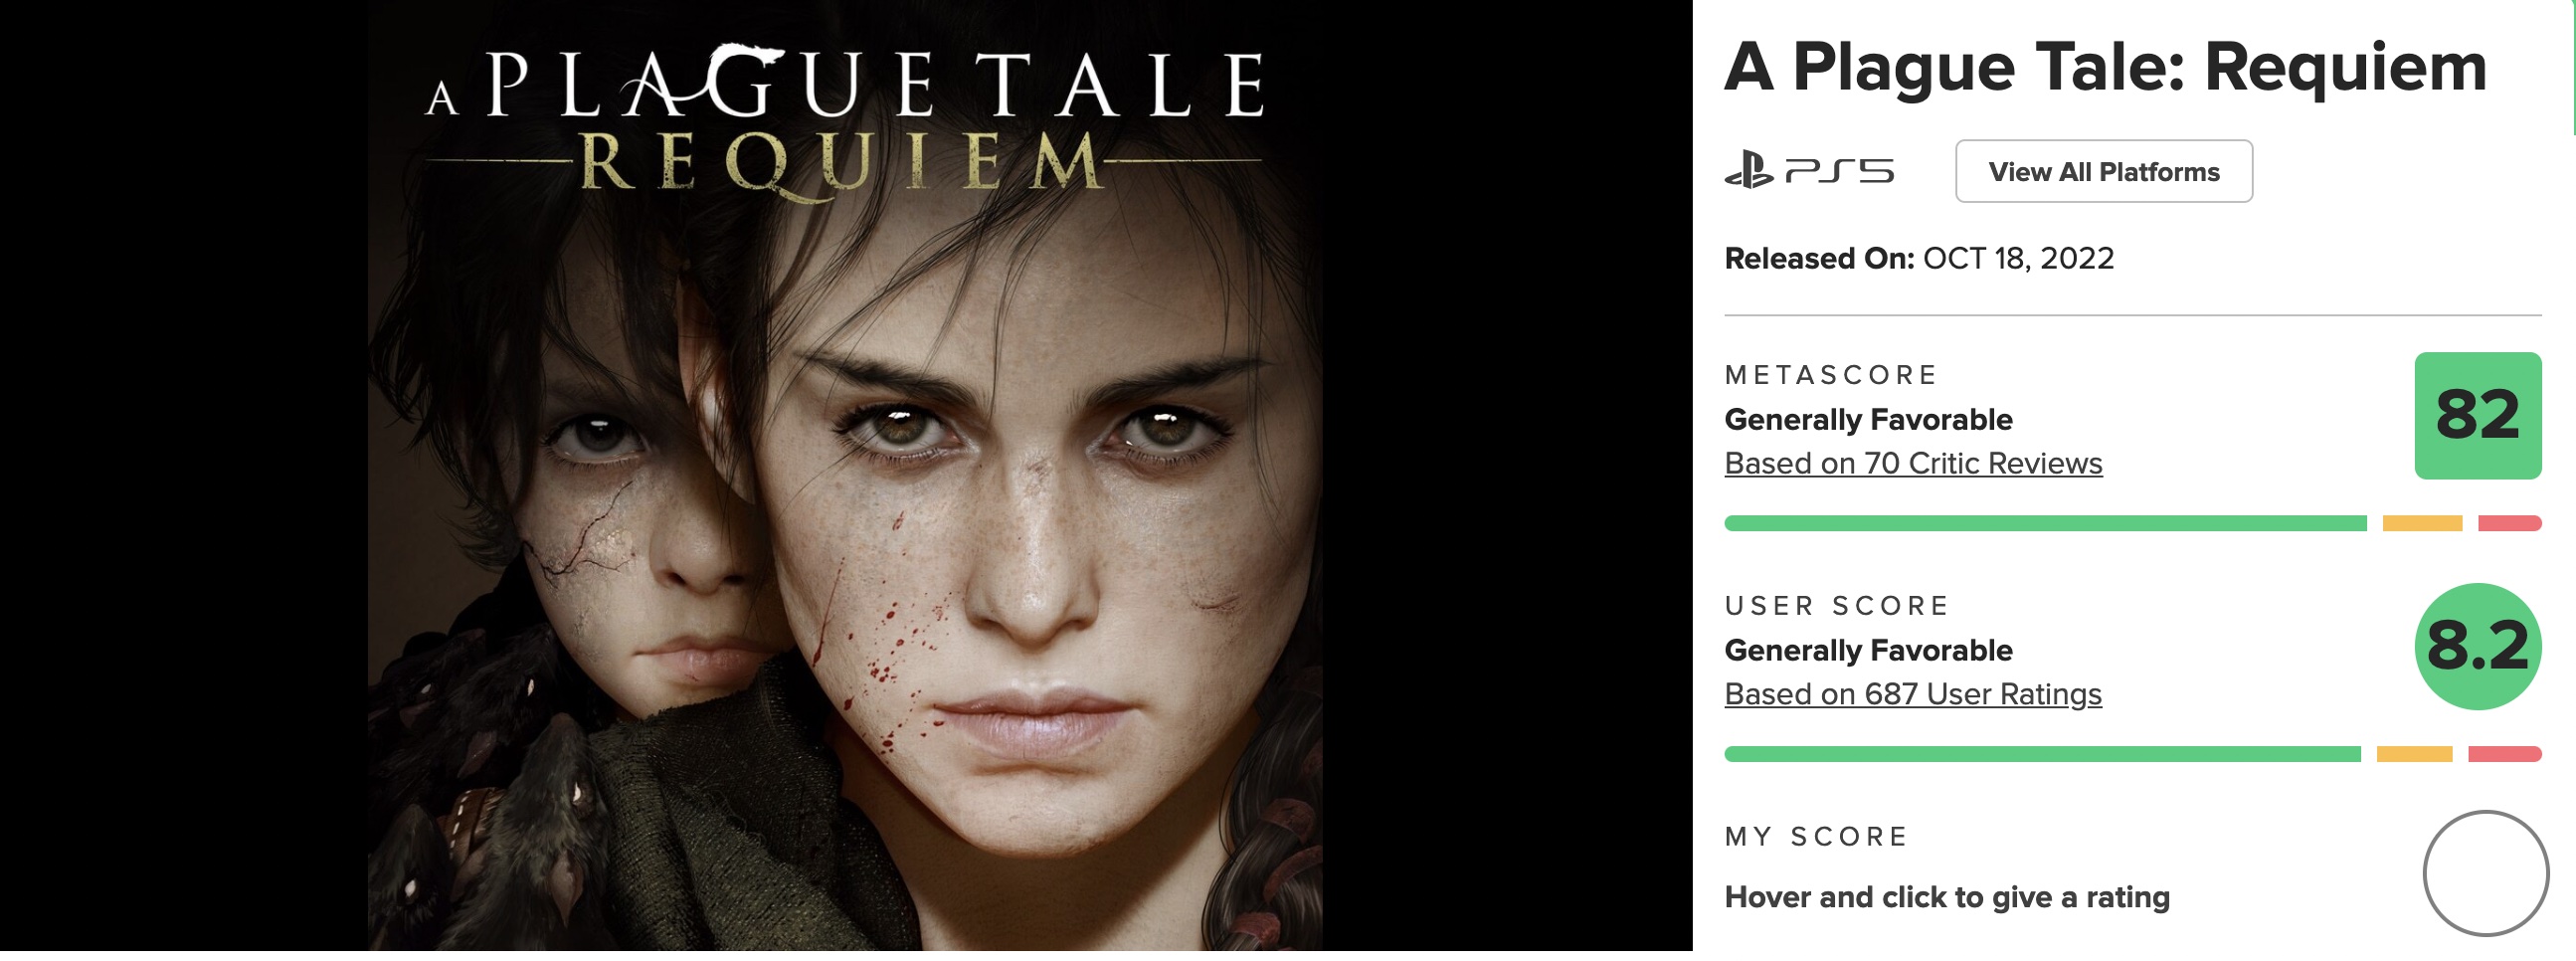 Games Like 'A Plague Tale: Requiem' to Play Next - Metacritic